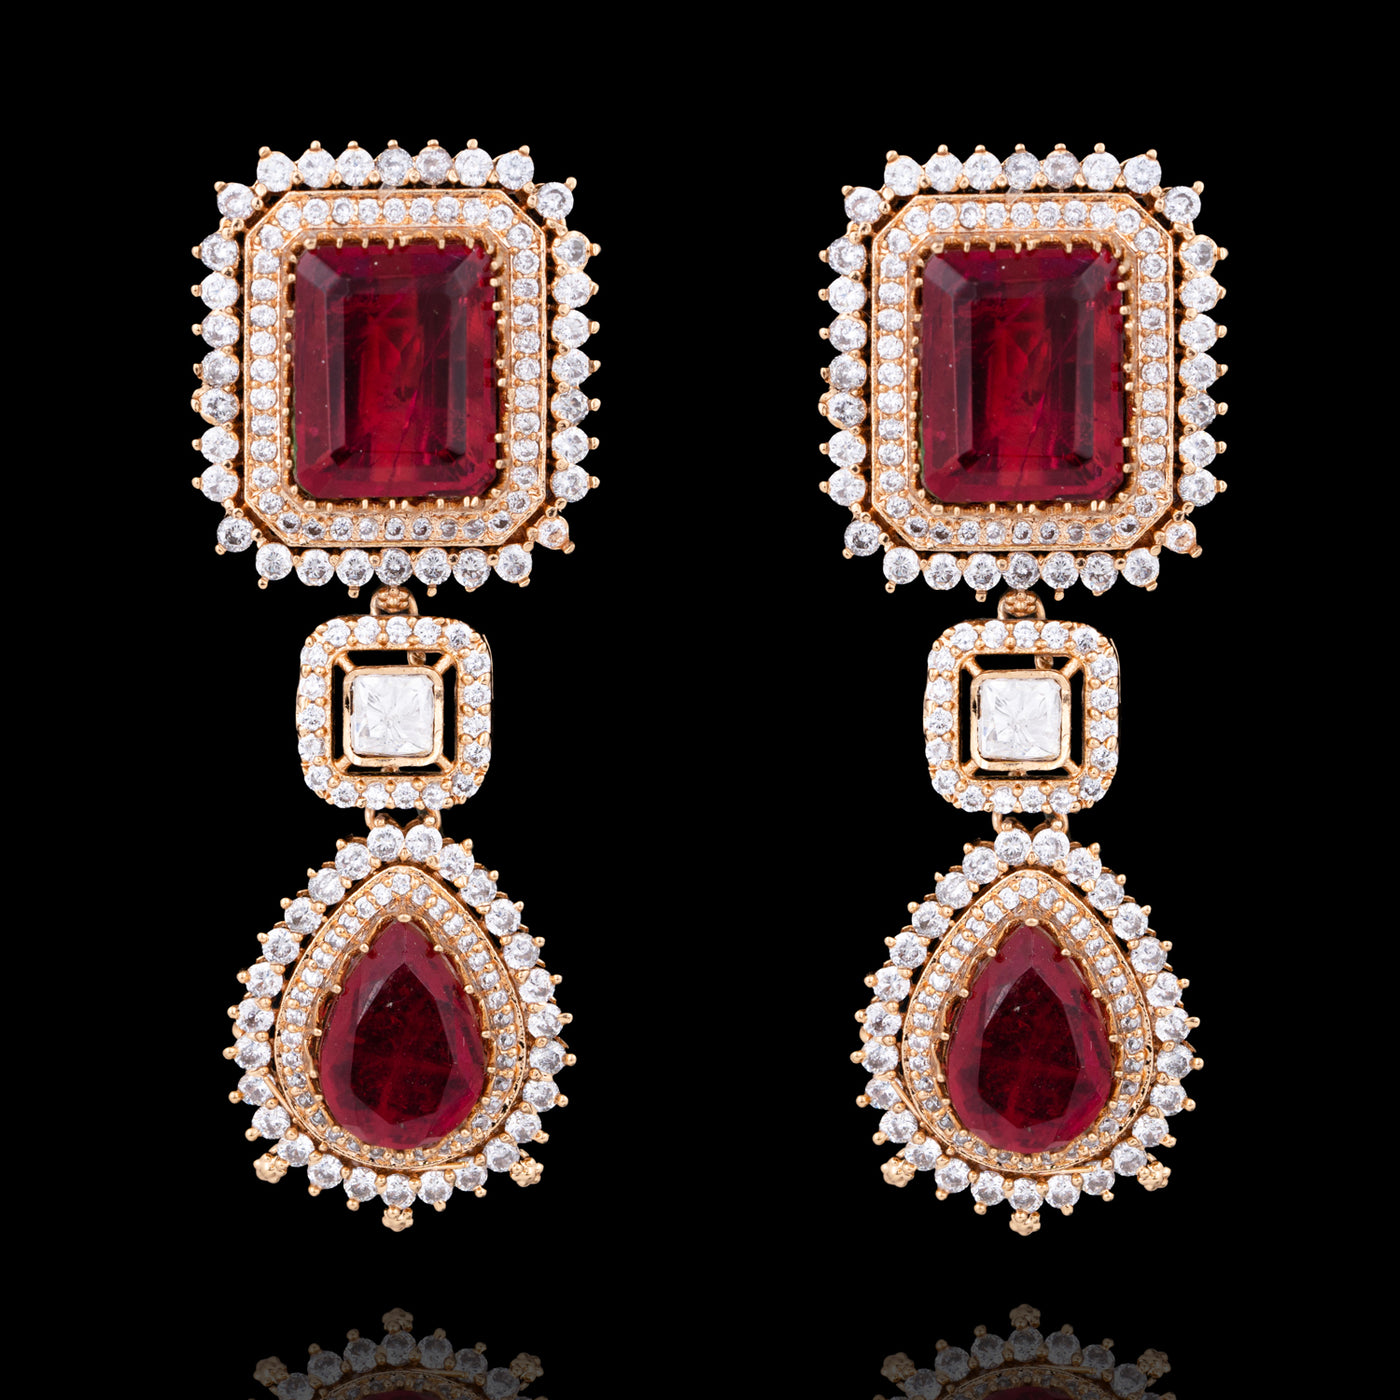 Iman Earrings - Available in 2 Colors